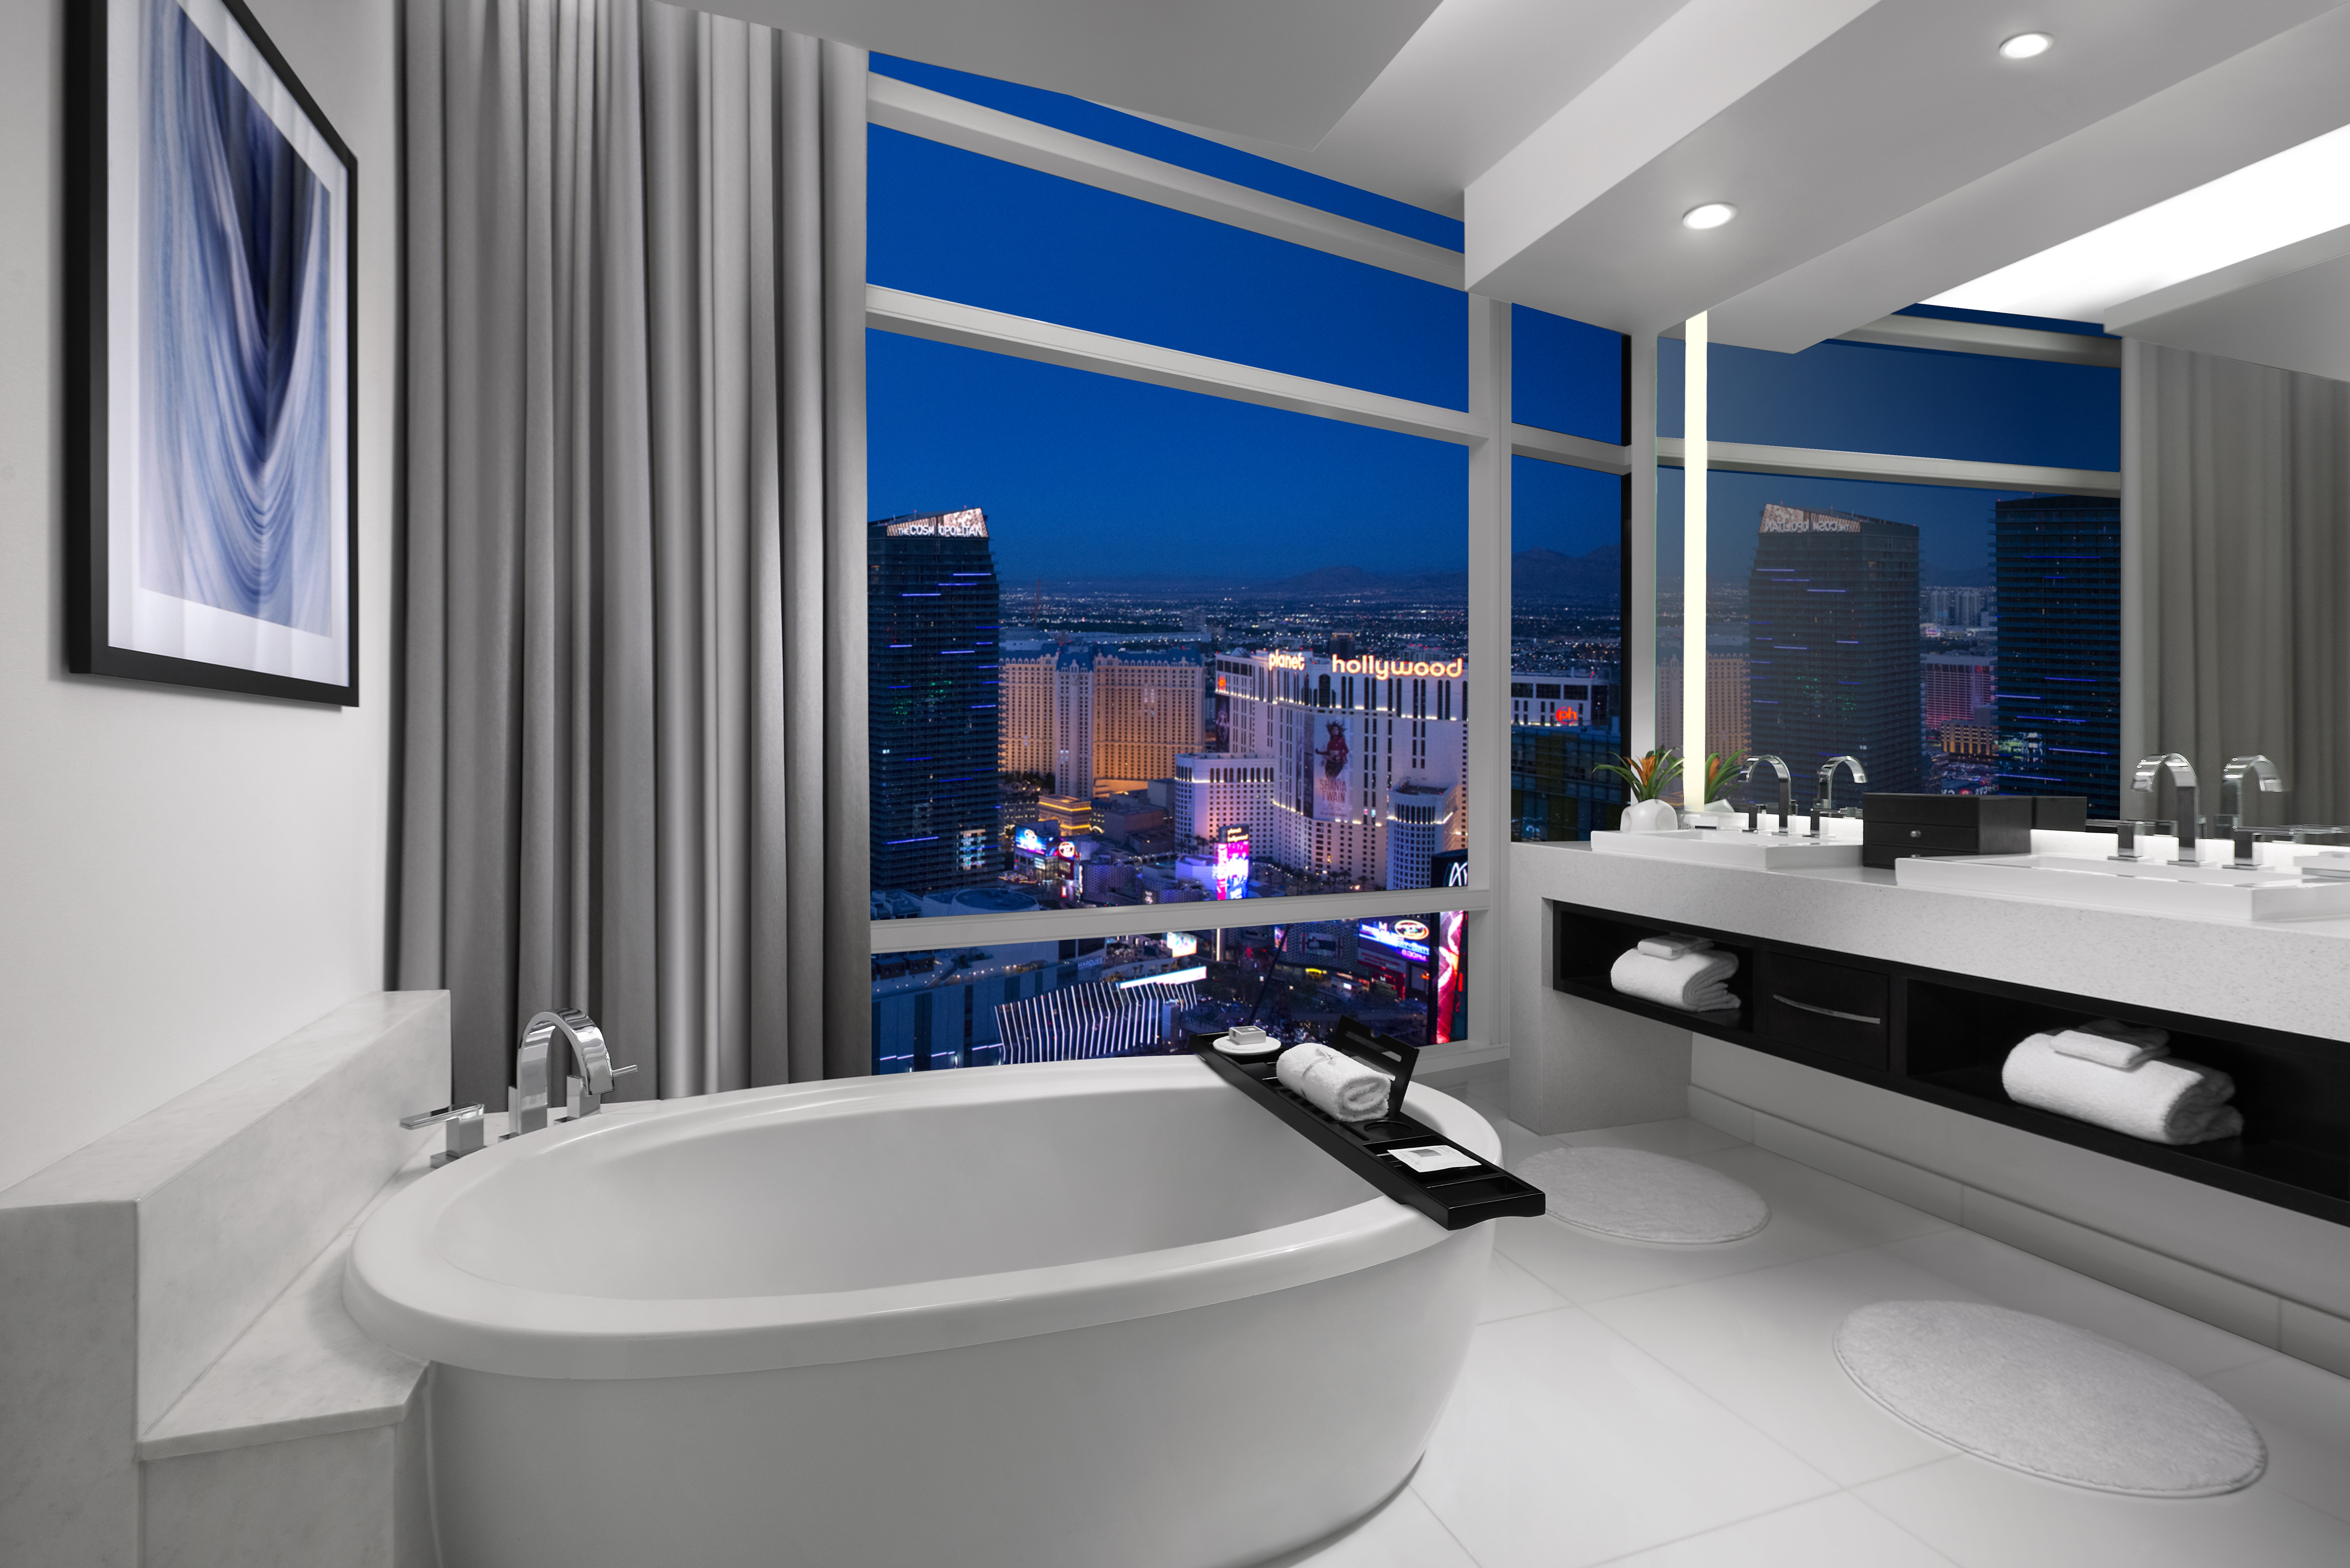 ARCH ABSTRACT 6: Aria Resort and Casino, Las Vegas Shower Curtain by Gray  Woods Studio